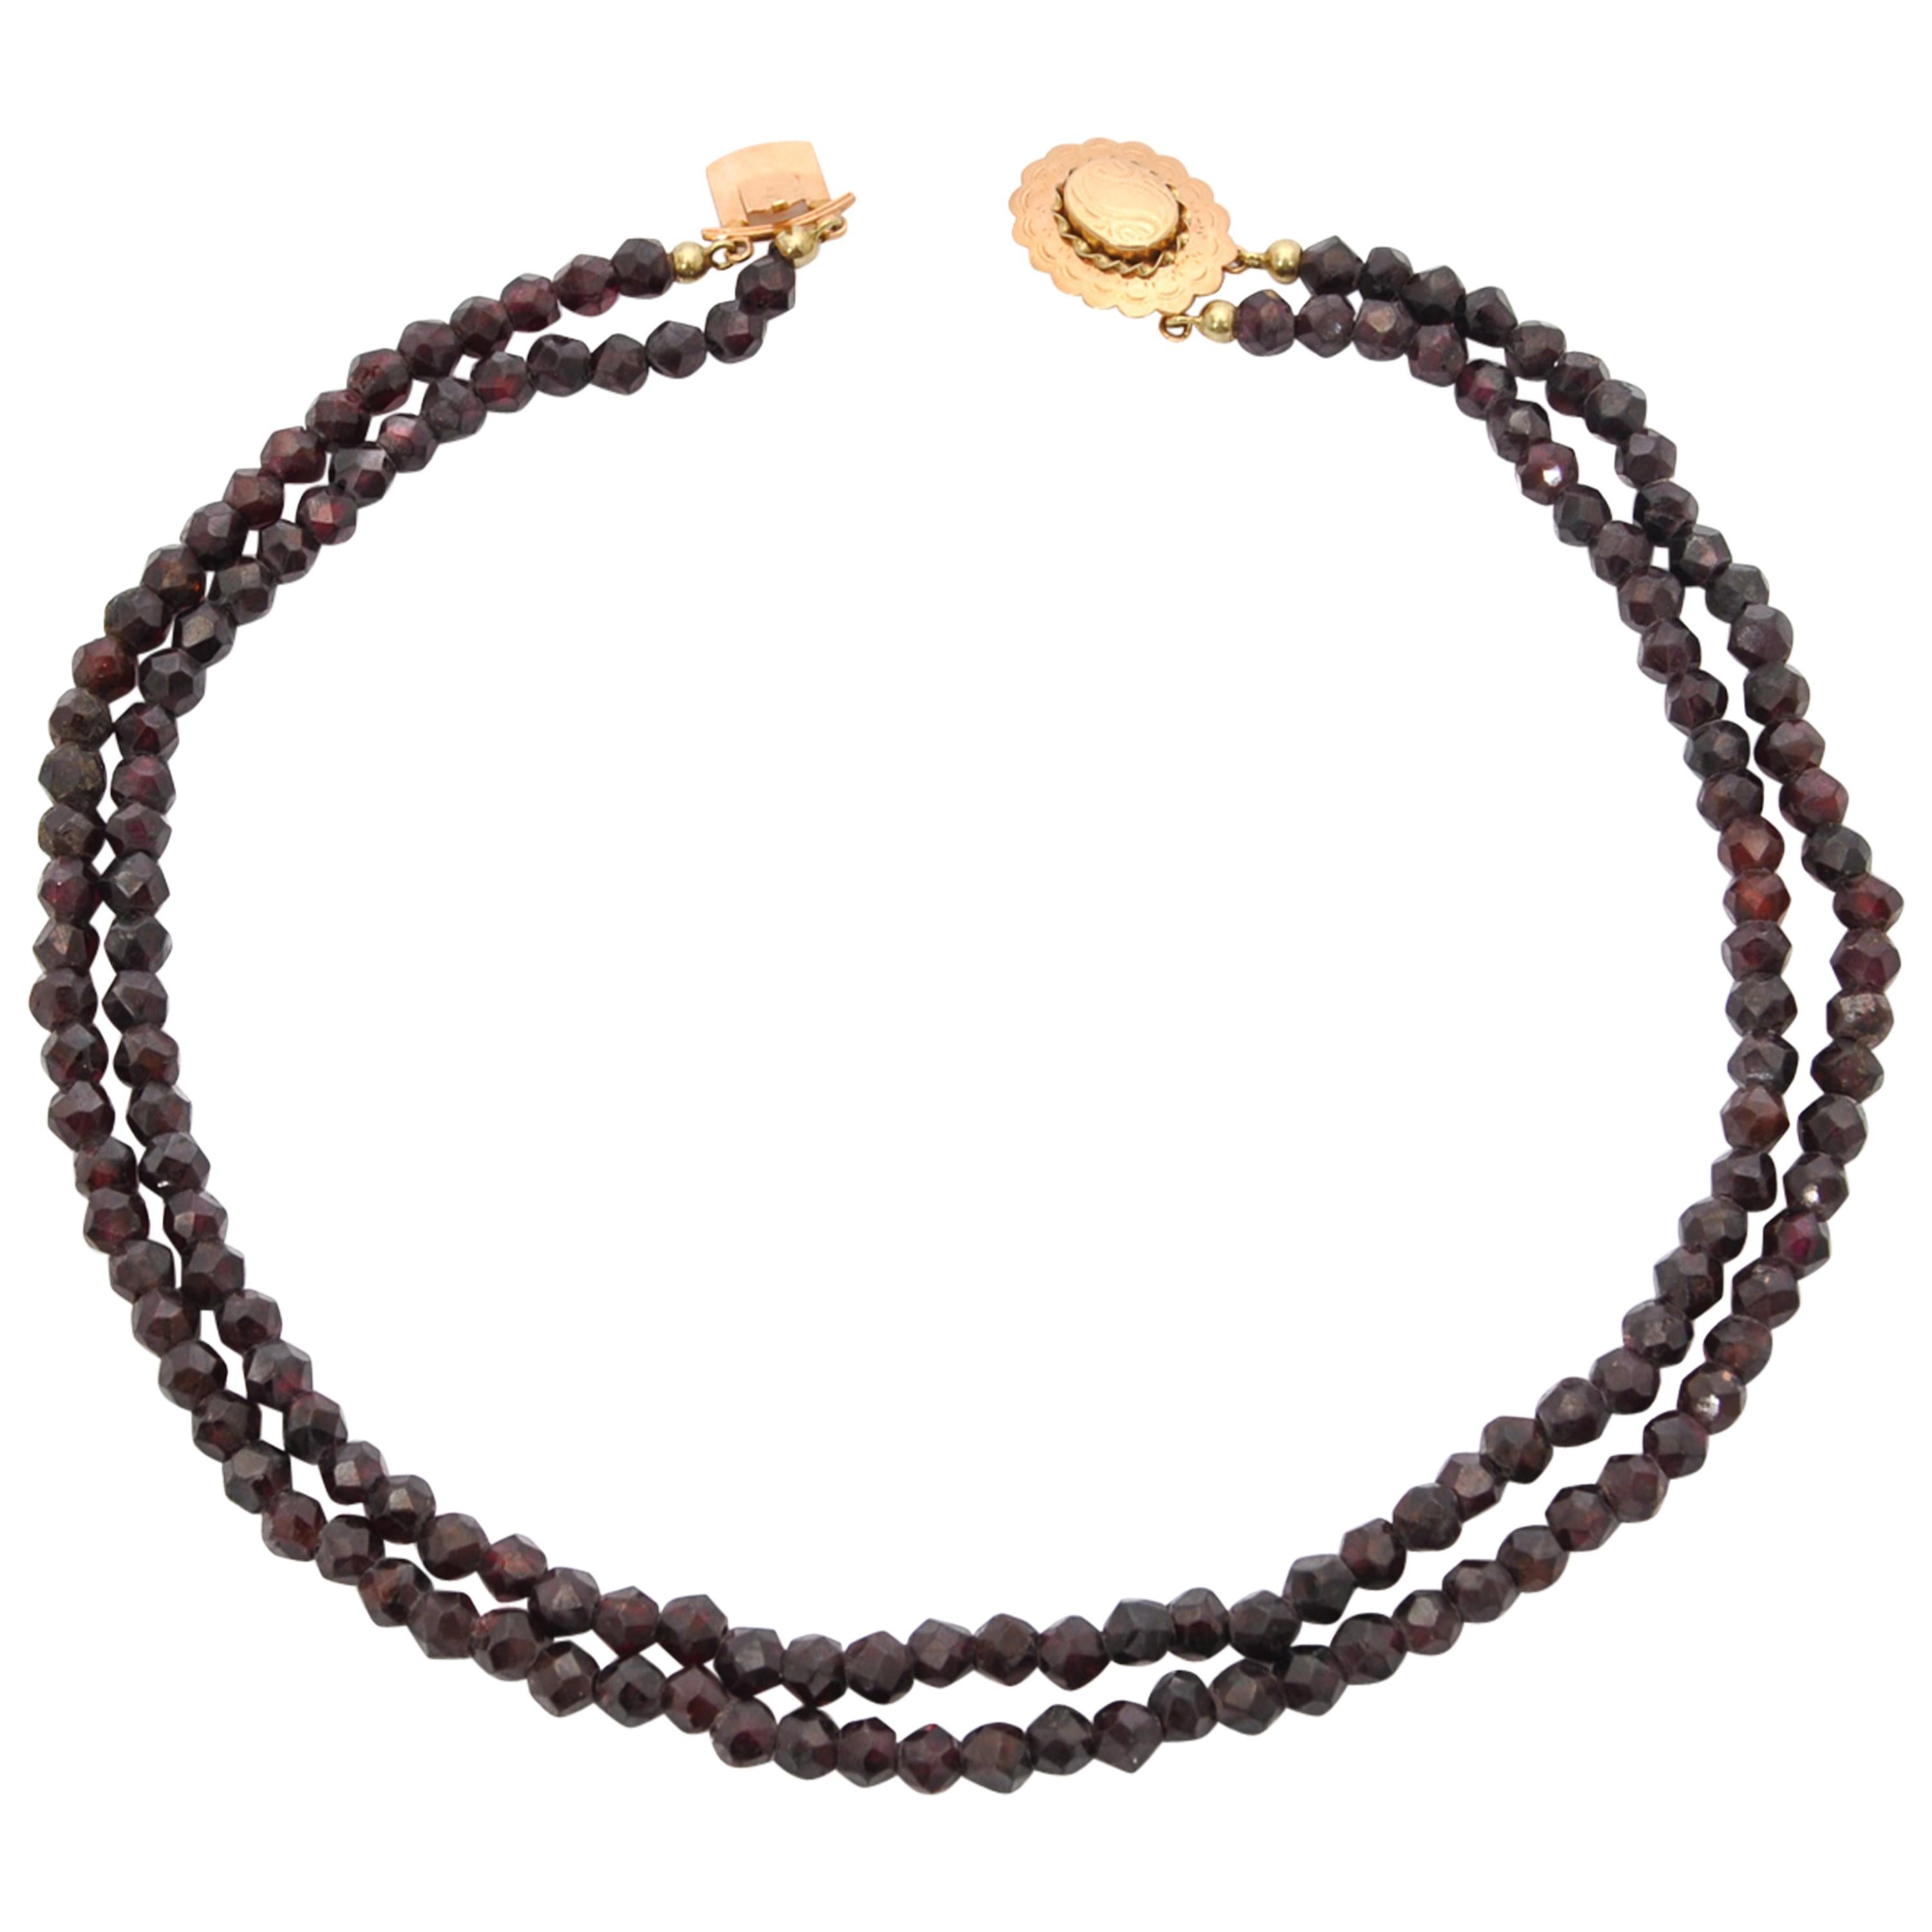 Antique 14K Gold and Garnet Two-Strand Beaded Necklace, Netherlands